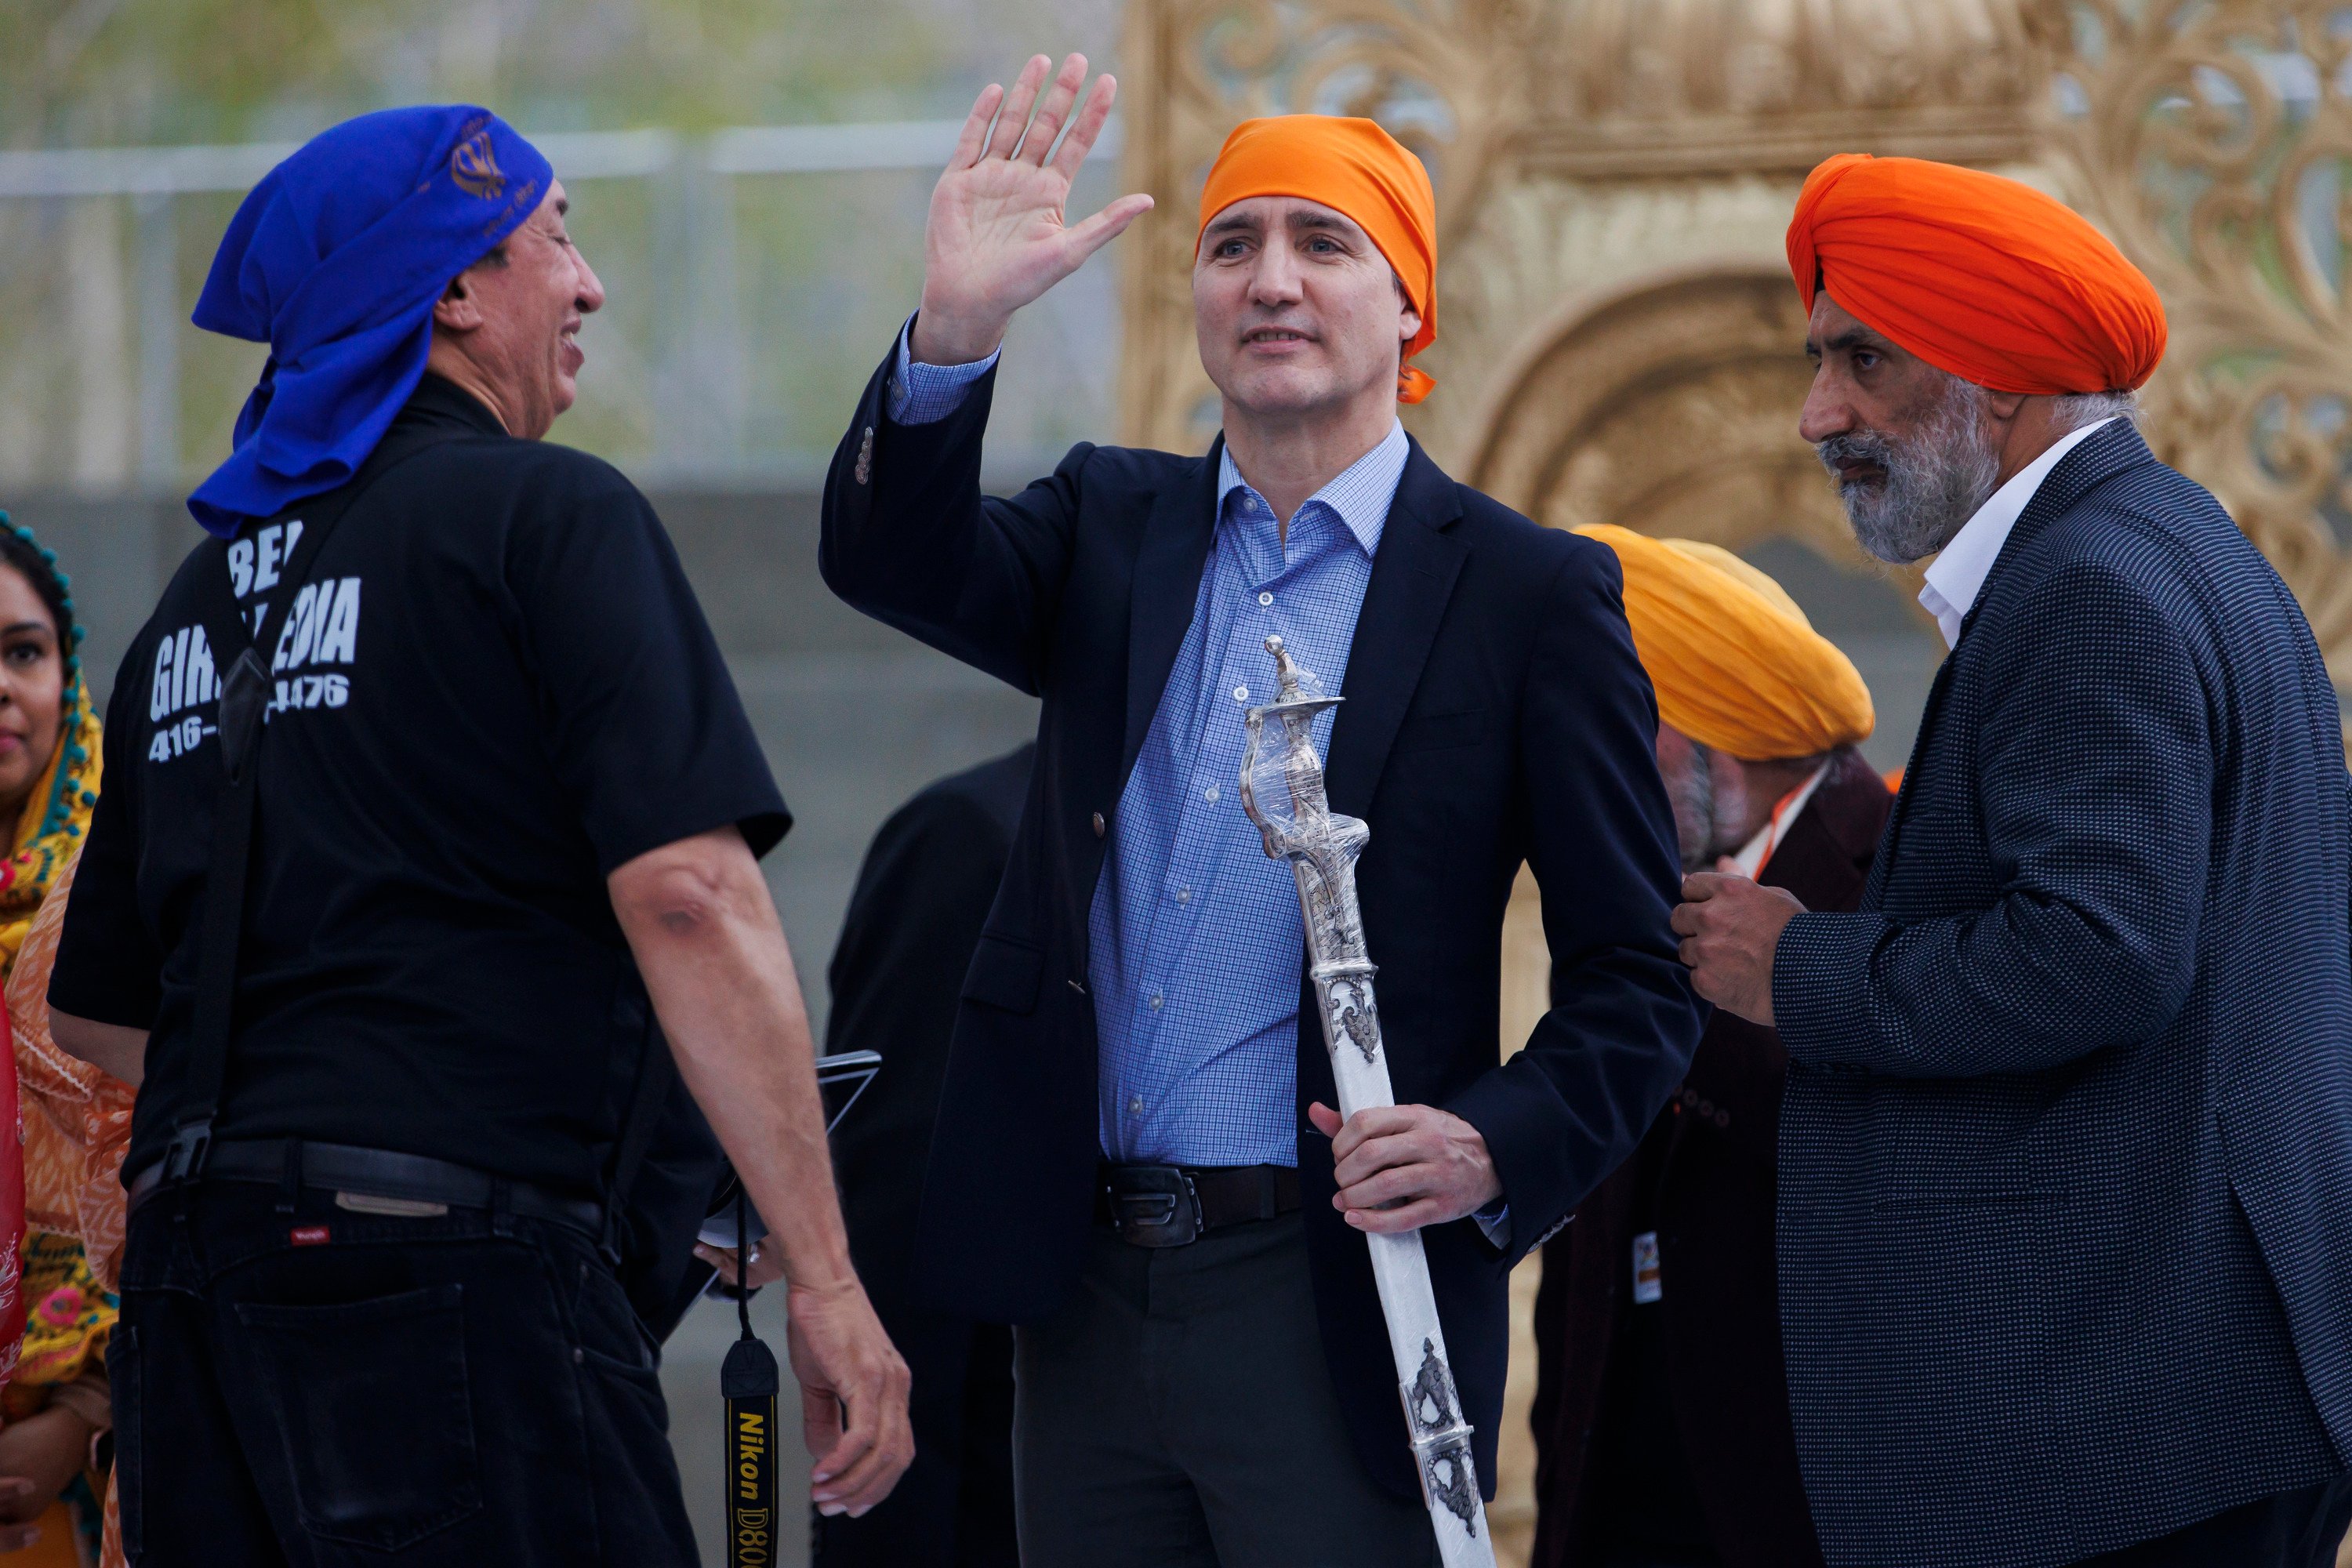 Canadian Prime Minister Justin Trudeau (centre) waves to the crowd after receiving a ceremonial sword as a gift from the Ontario Sikhs and Gurudwara Council on April 28. Photo: The Canadian Press via AP